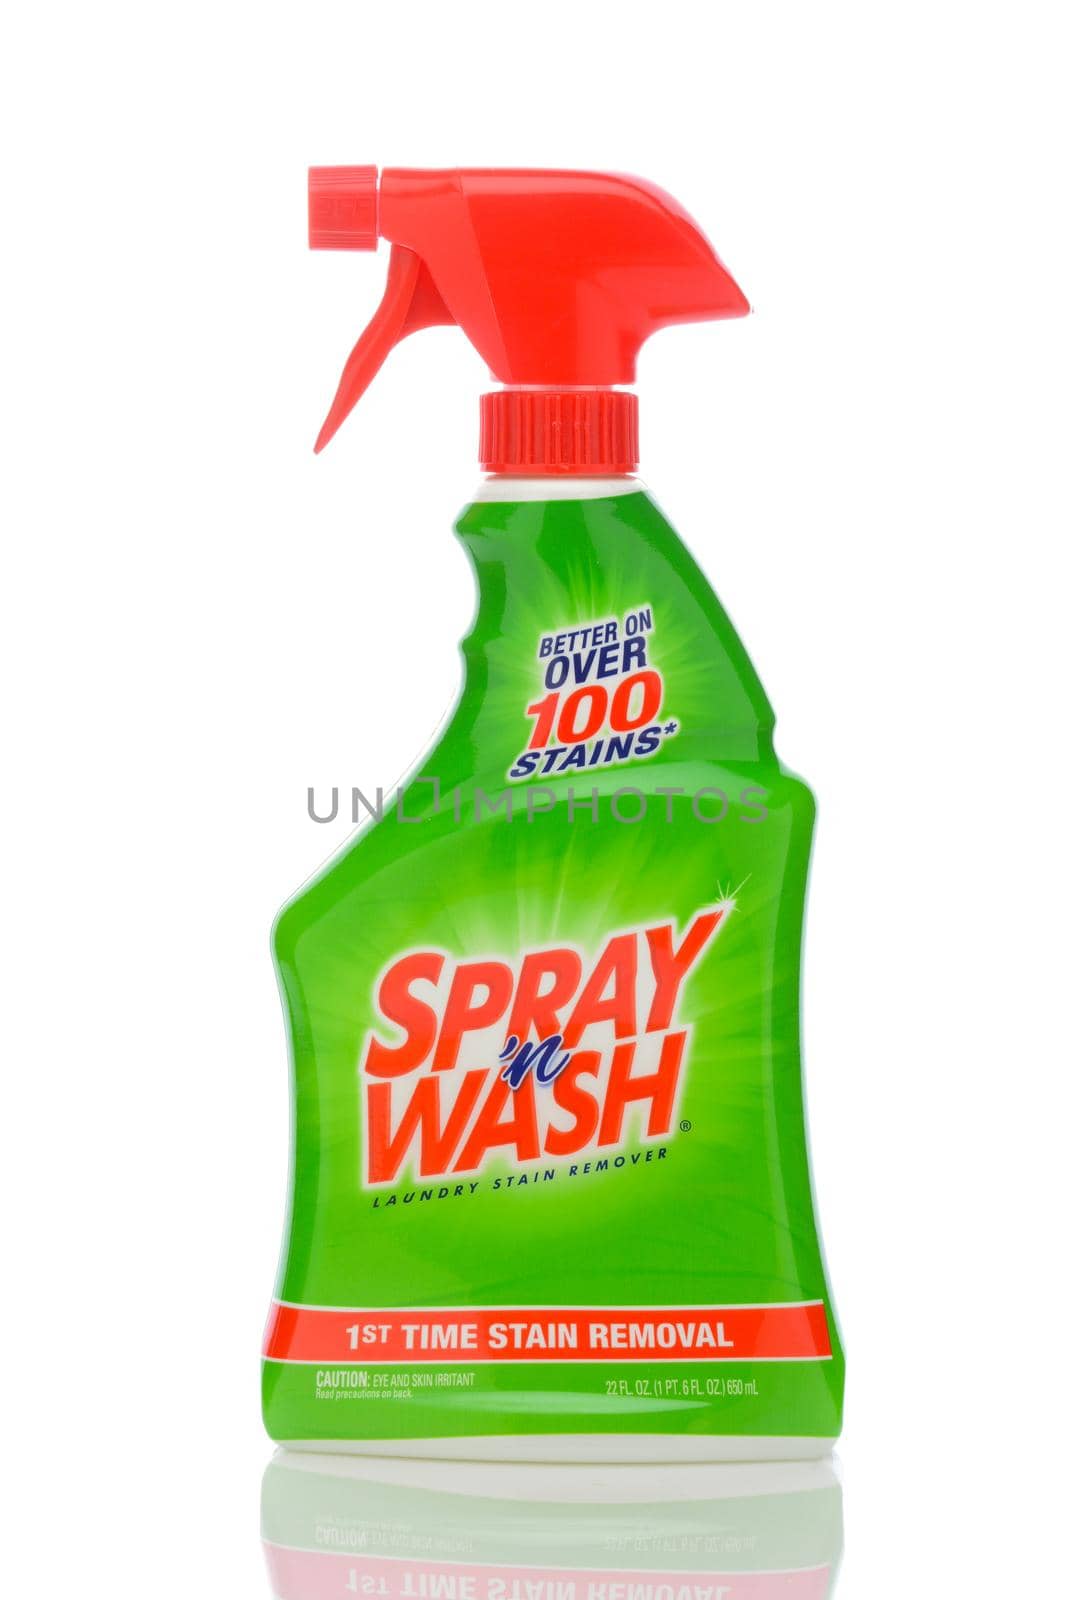 IRVINE, CALIFORNIA - MAY 22, 2019:  A Bottle of Spray n Wash Laundry Stain Remover